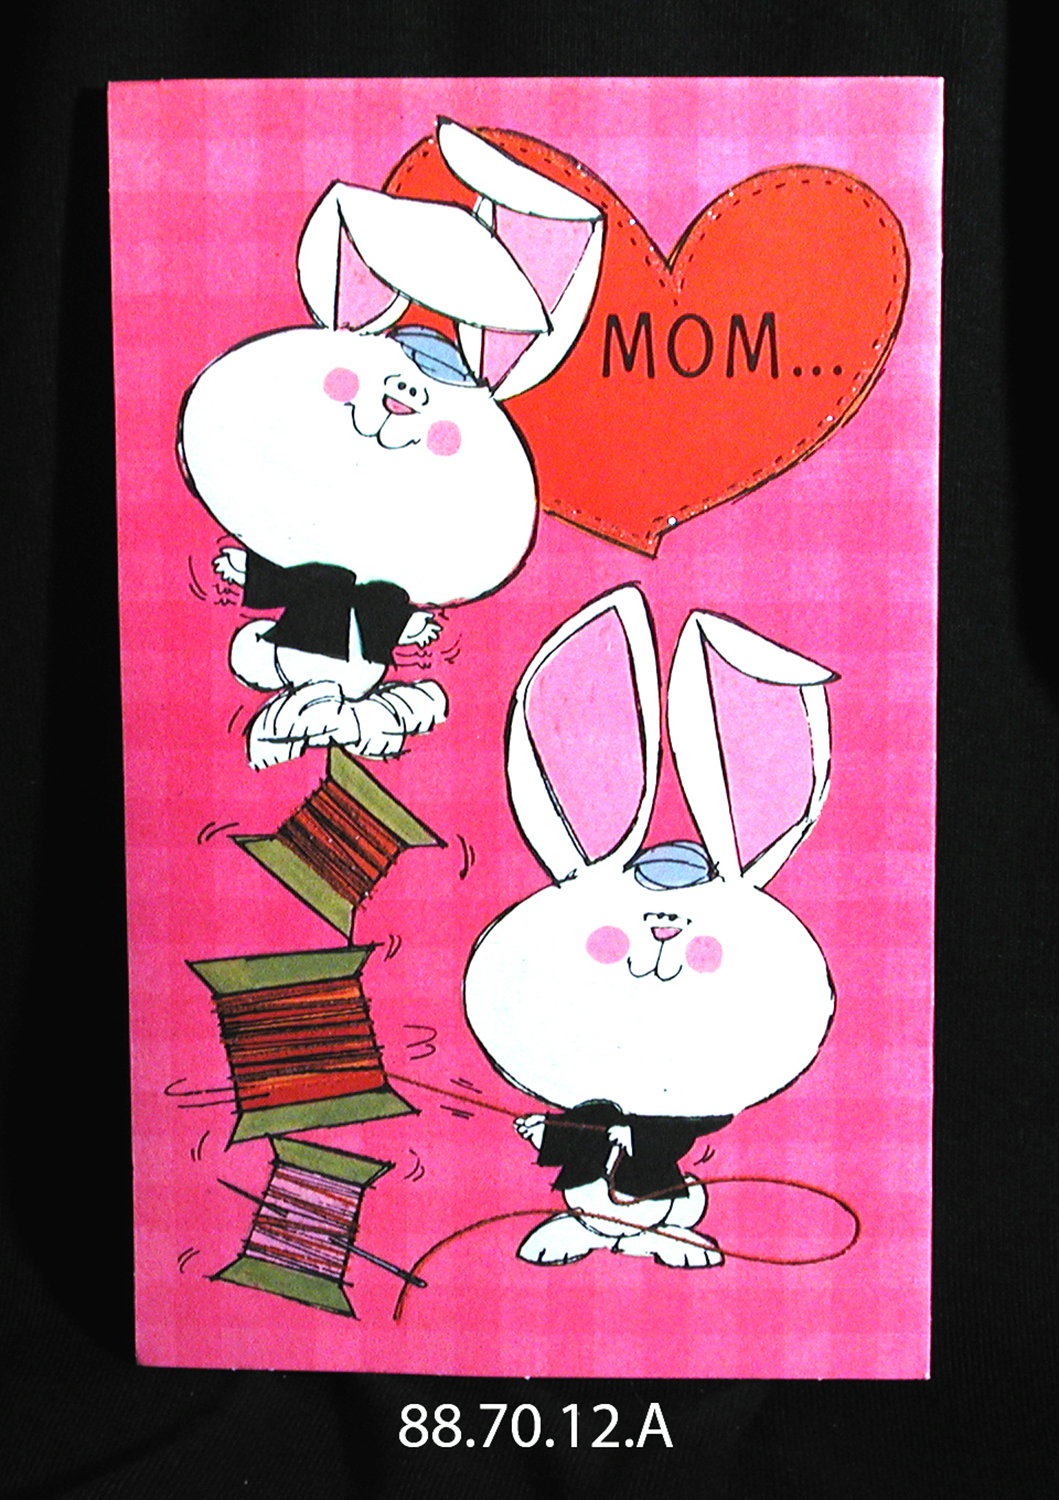 A valentine card depicting rabbits, with the word "Mom" in a heart.